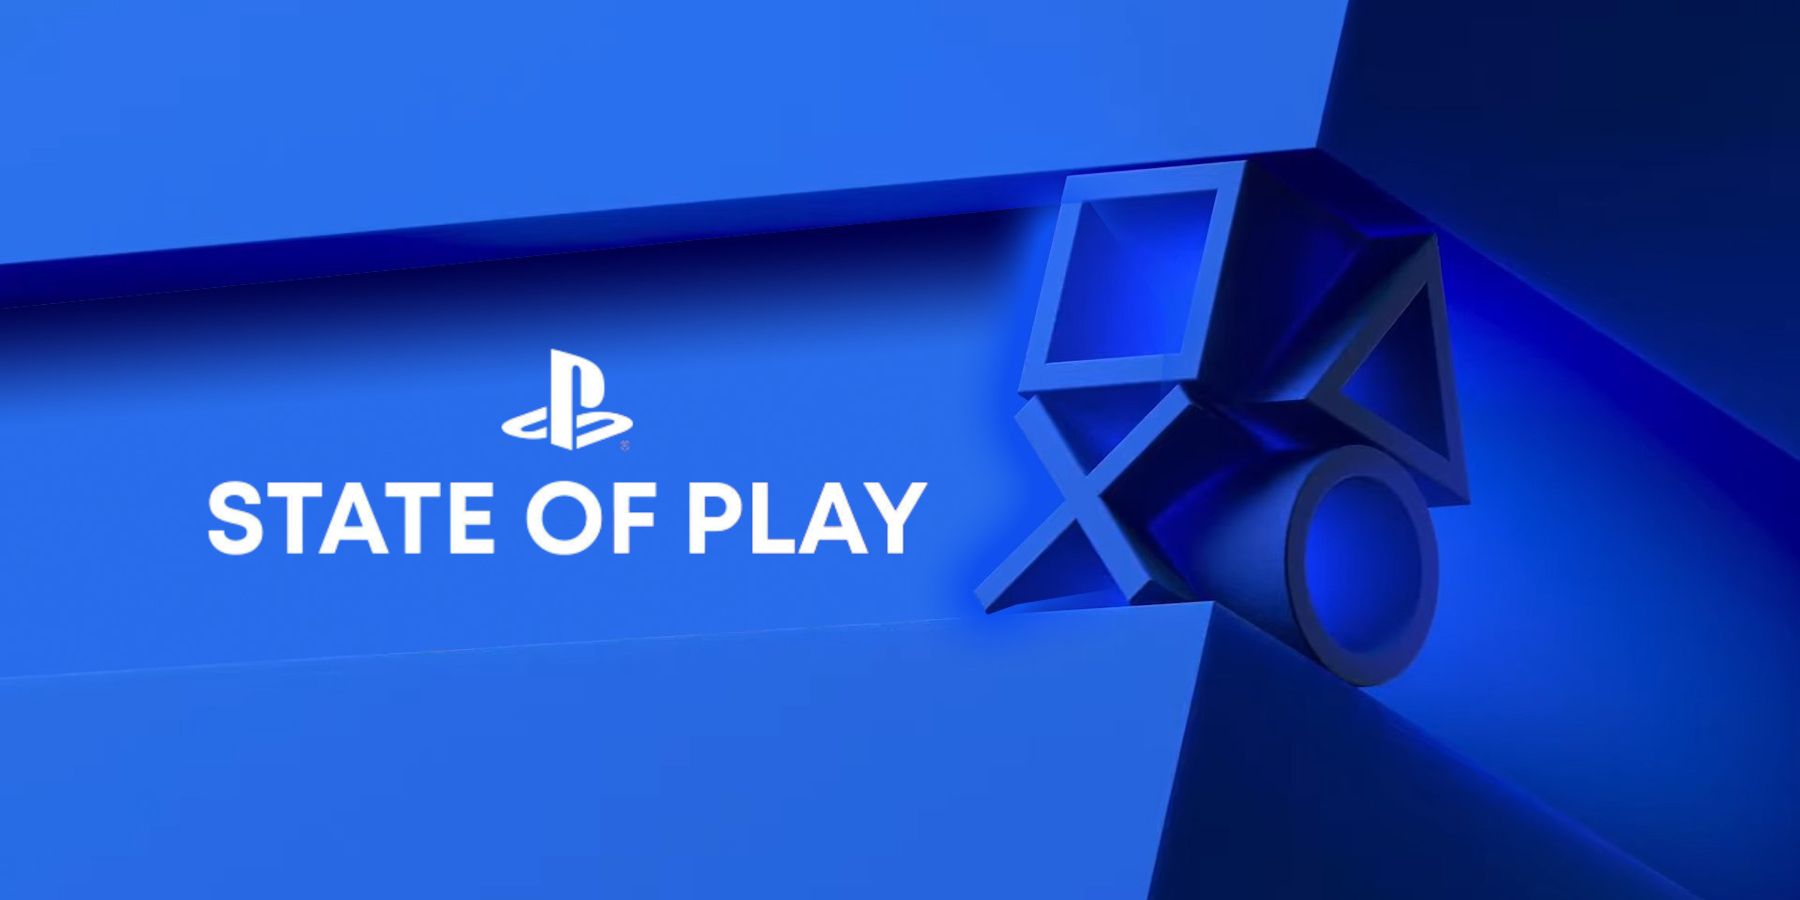 state of play logo on a blue playstation background